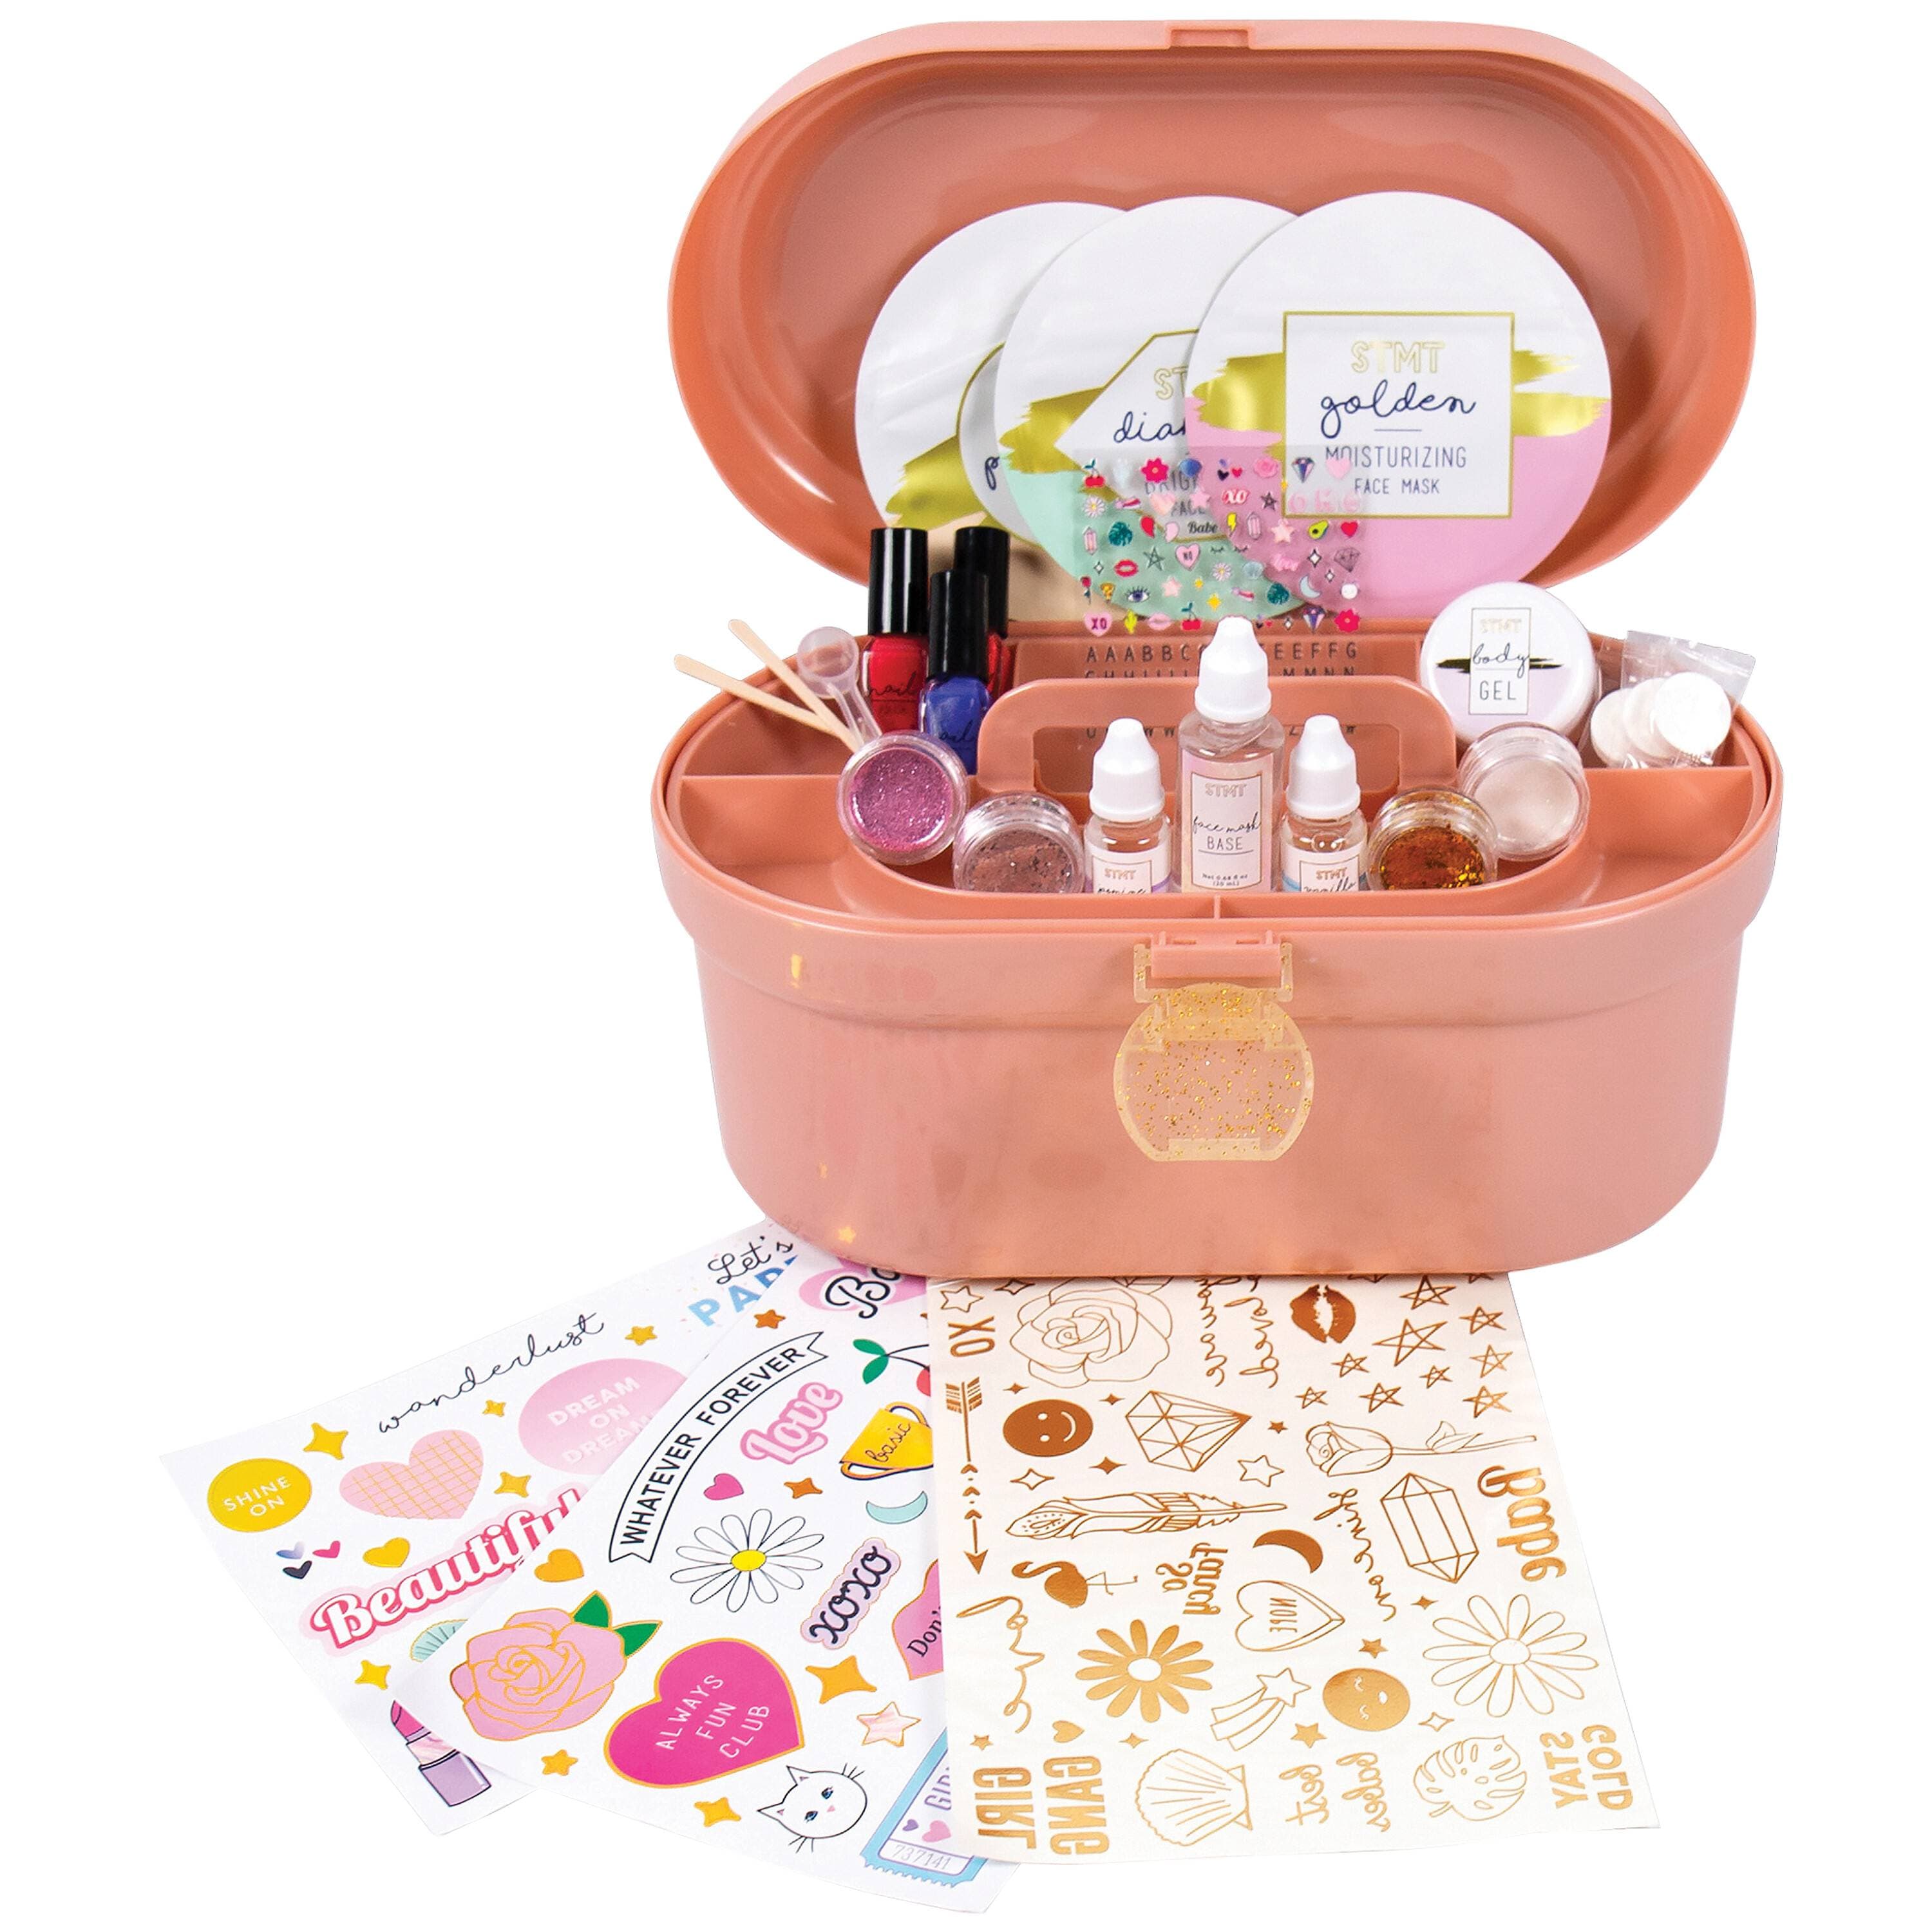 US Toy Company/Constructive Playthings US Toy Company DIY Cosmetics Case - Little Miss Muffin Children & Home